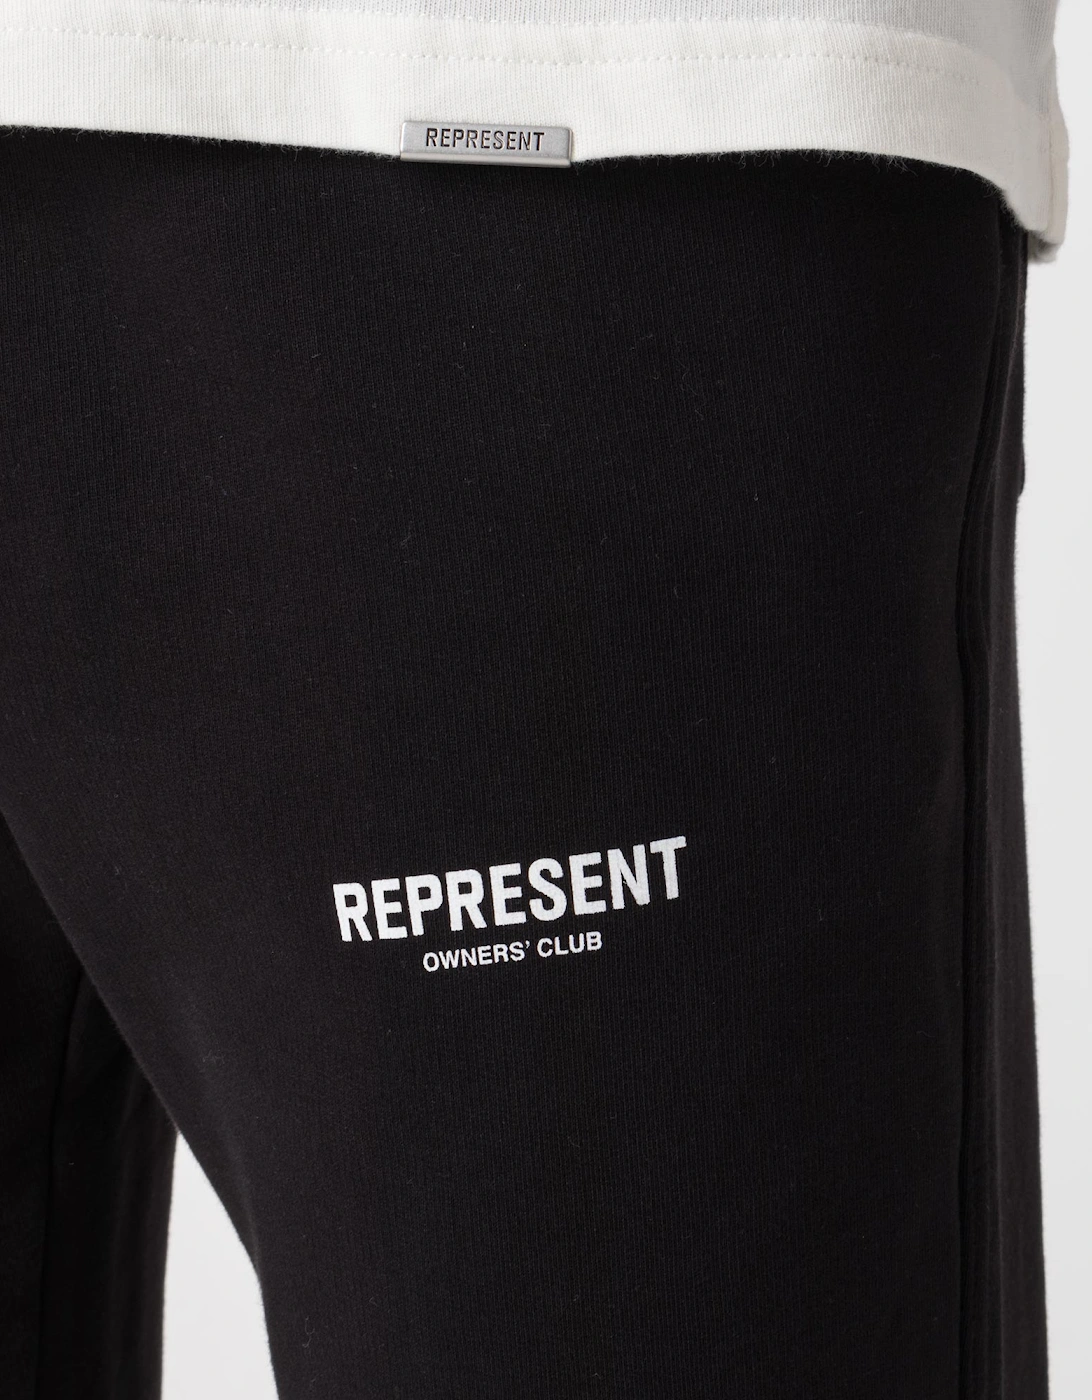 Relaxed Fit Owners' Club Joggers